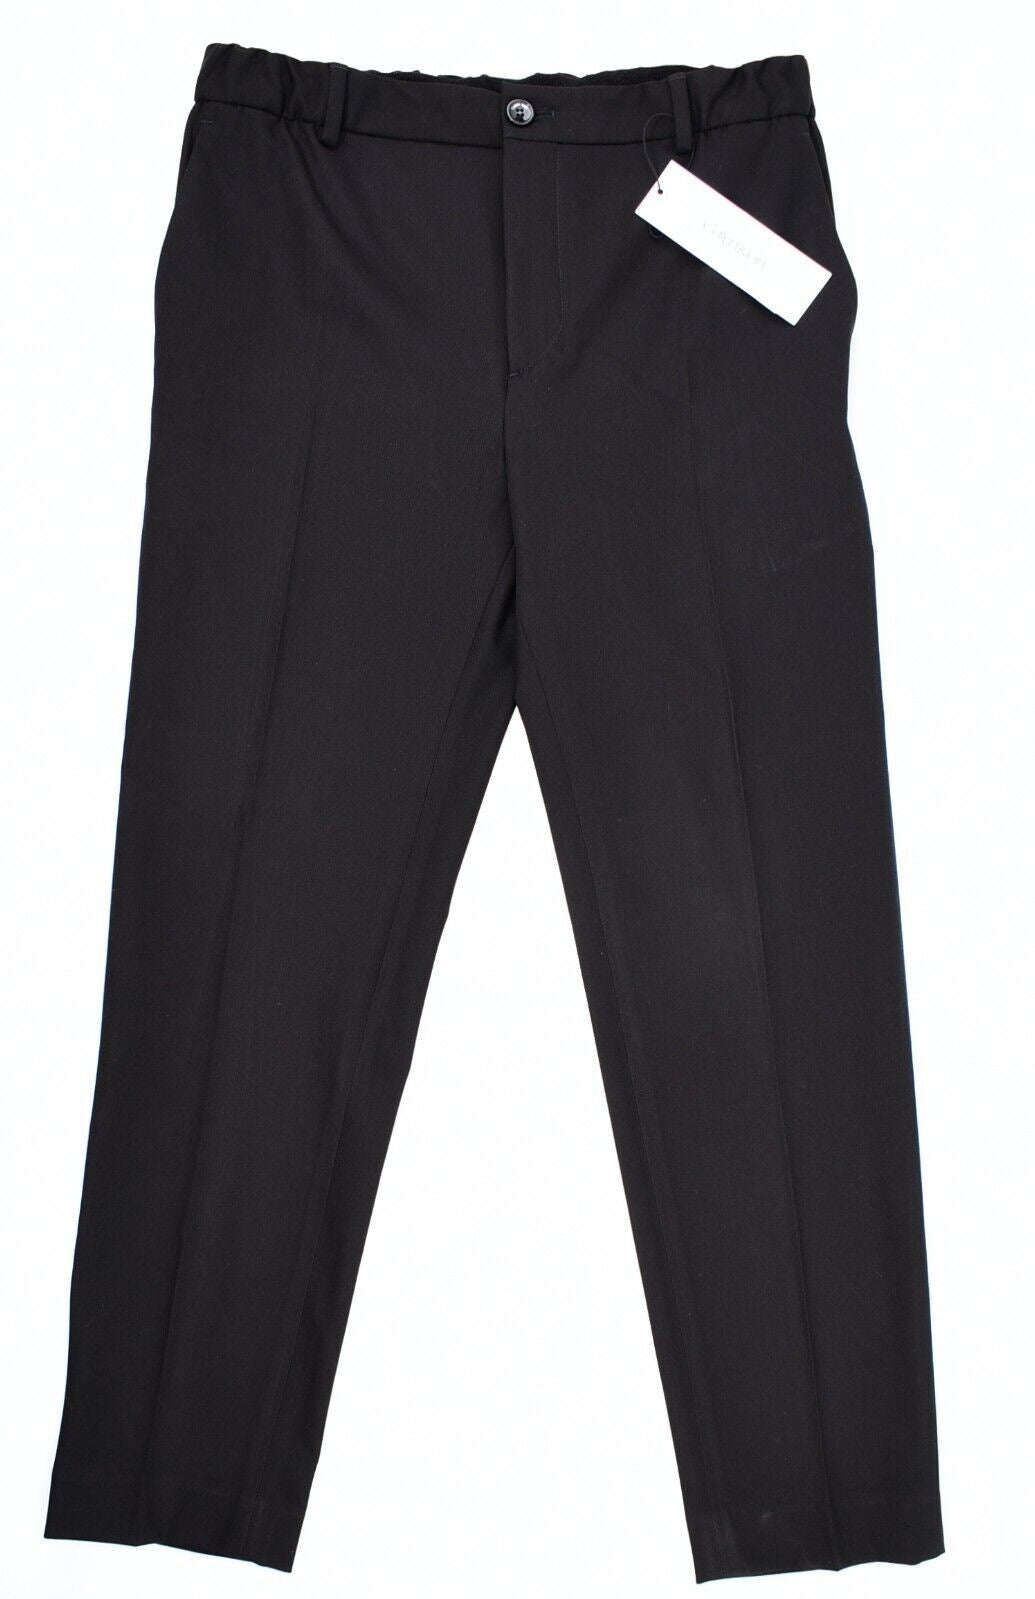 CALVIN KLEIN Men's Tapered Fit Stretch Fabric Trousers, Black, size W30